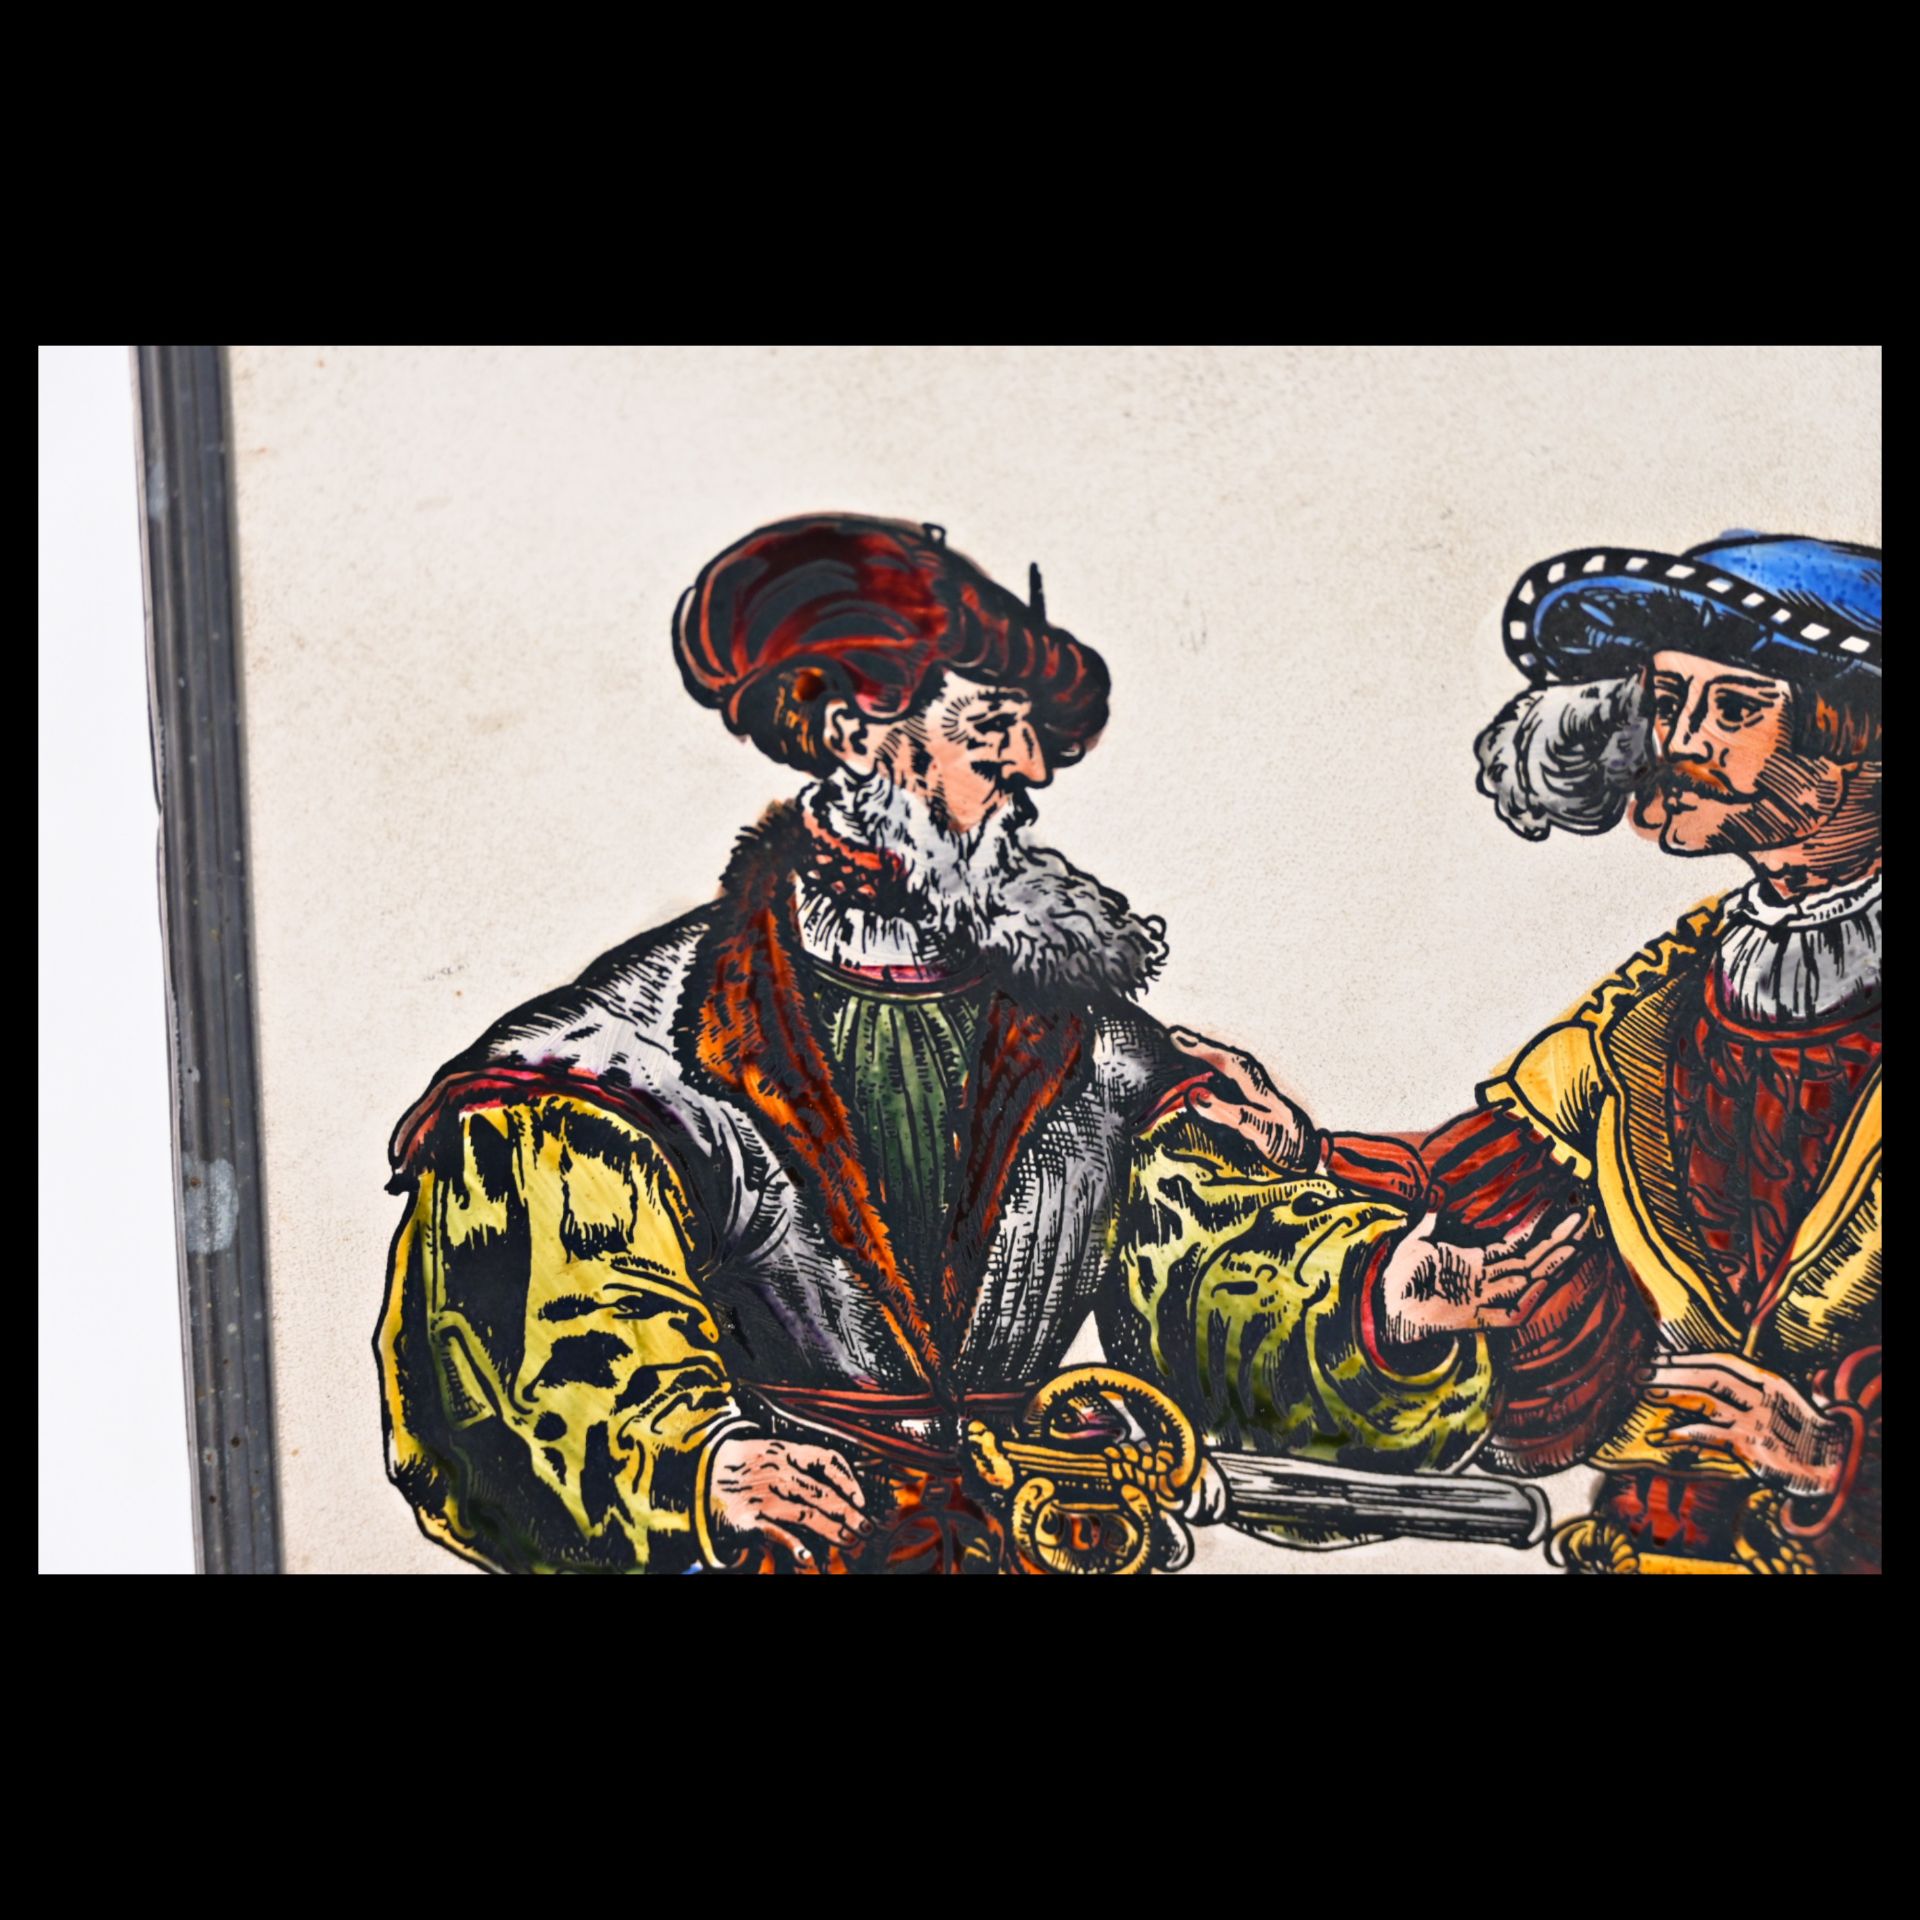 Landsknechts, Painting on glass in the style of 16th century engravings. - Bild 5 aus 8